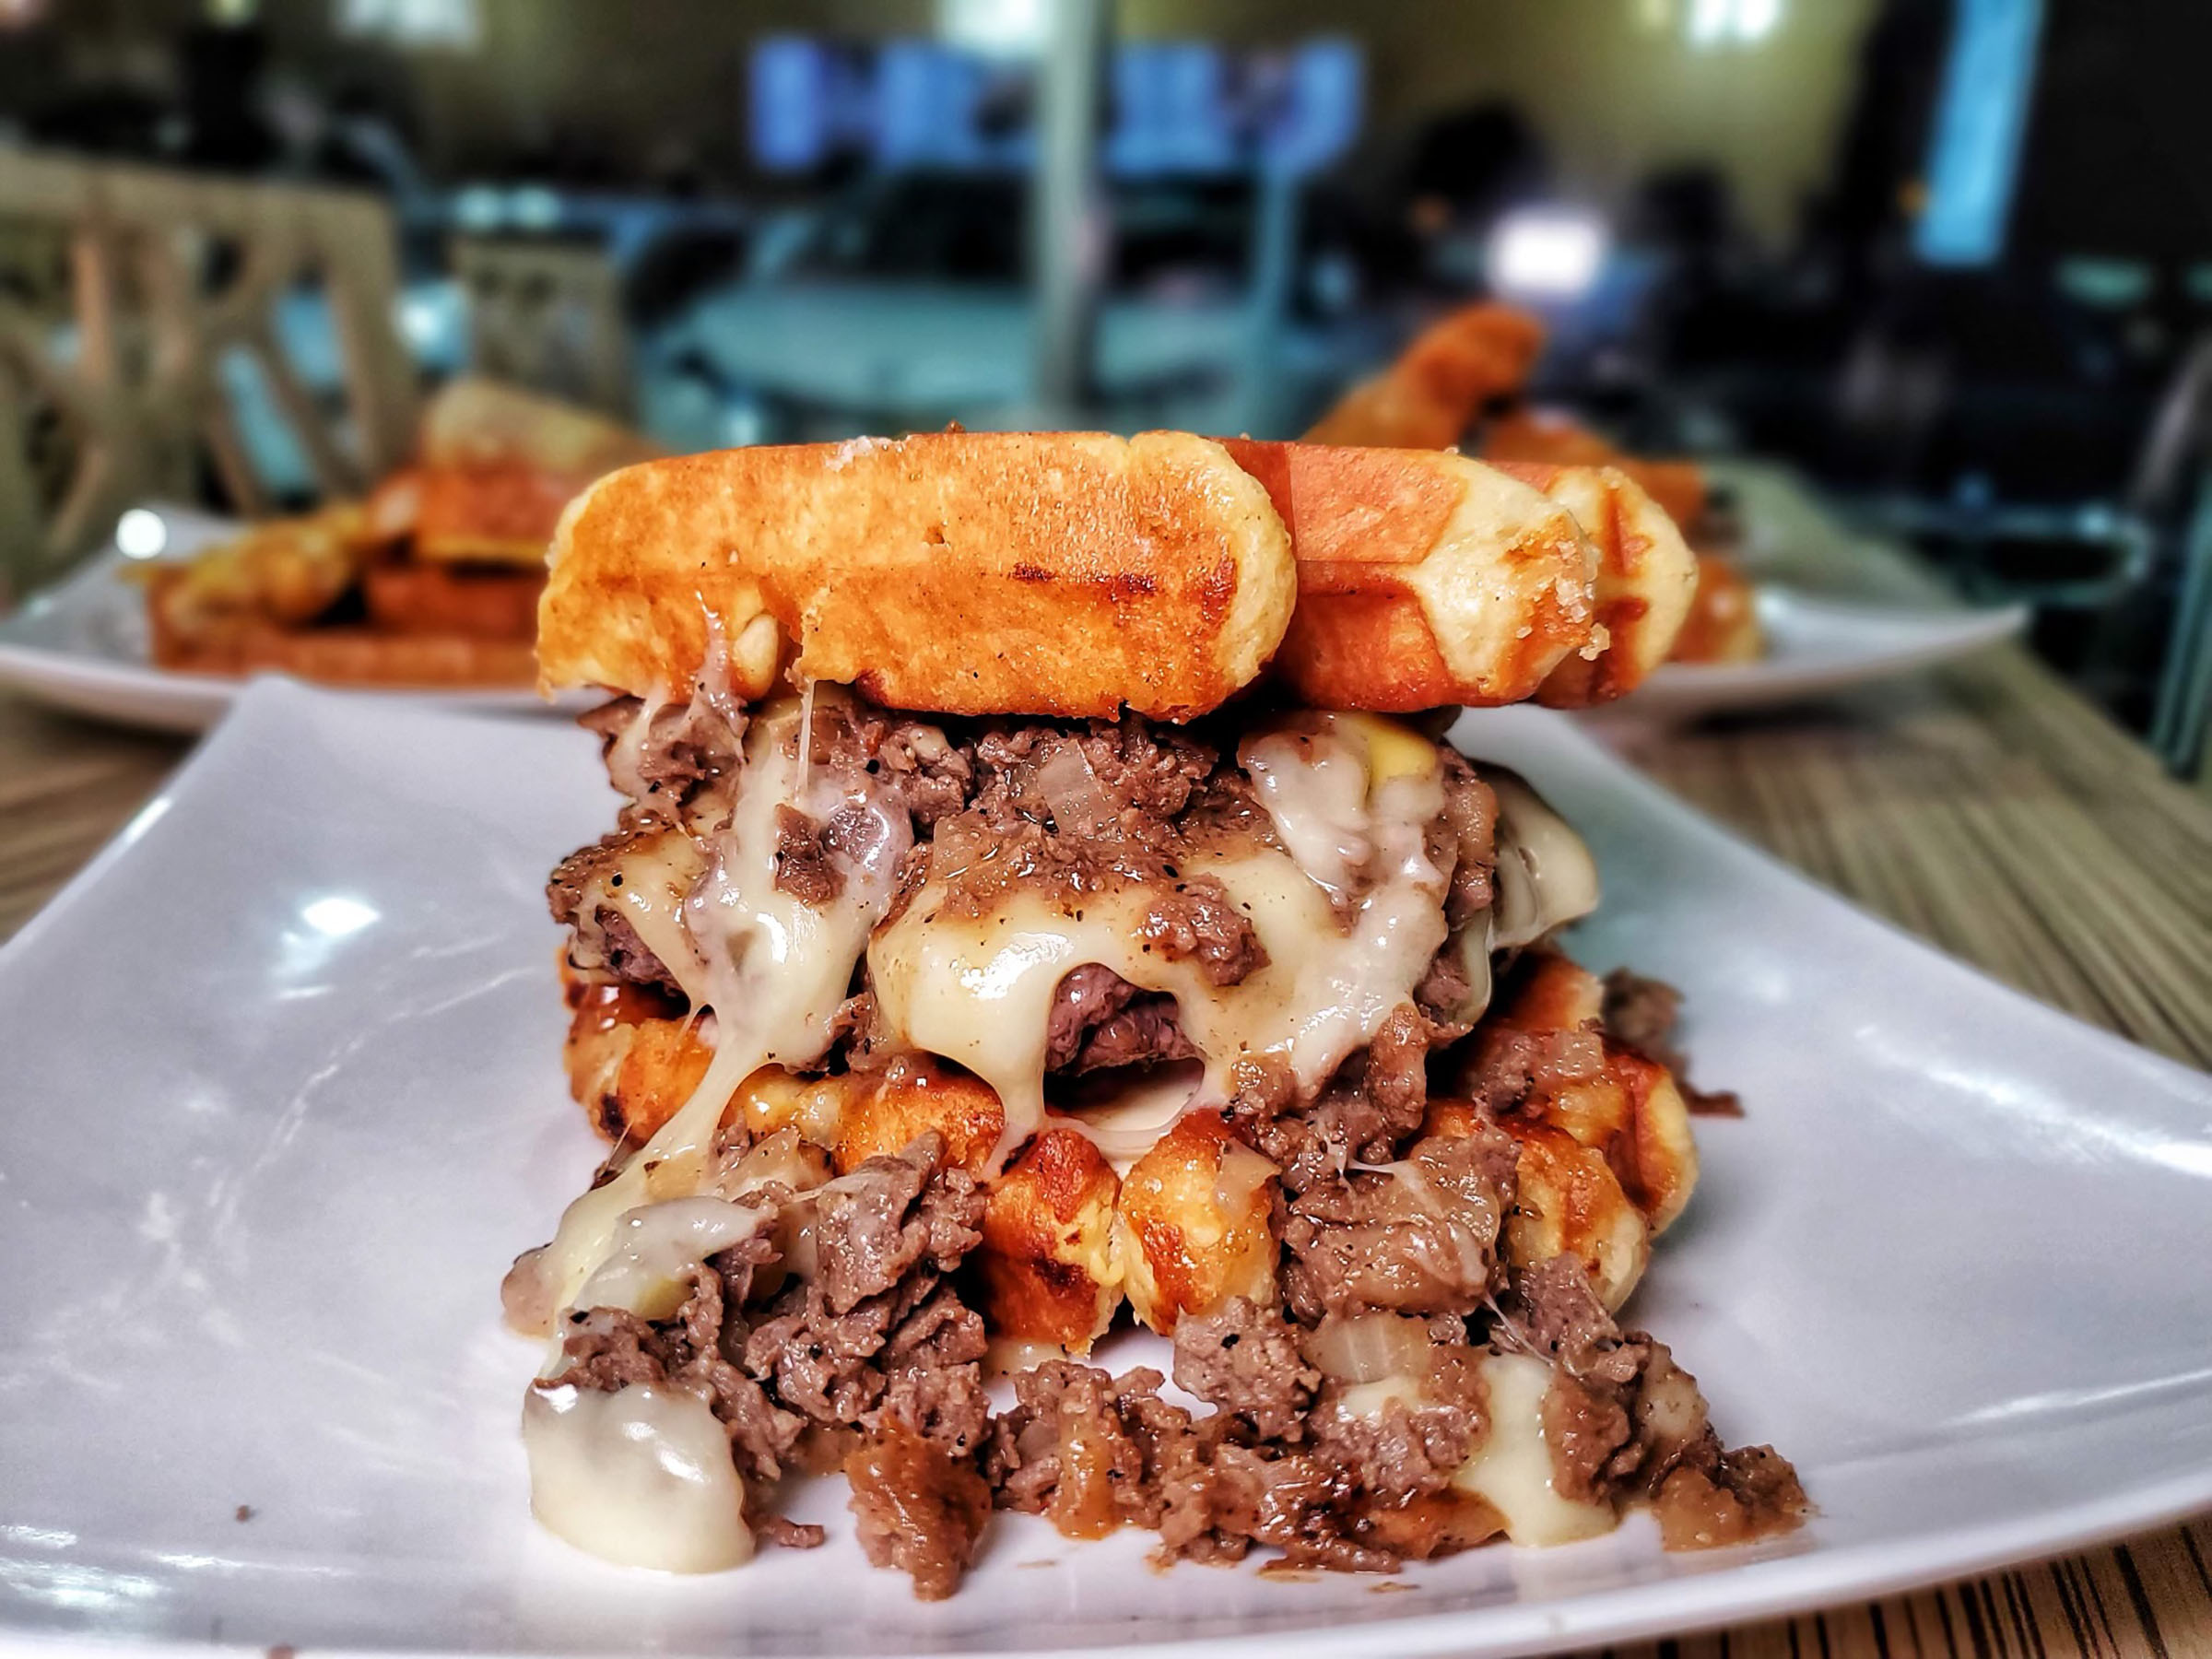 Two waffles piled high with a large portion of meat and cheese